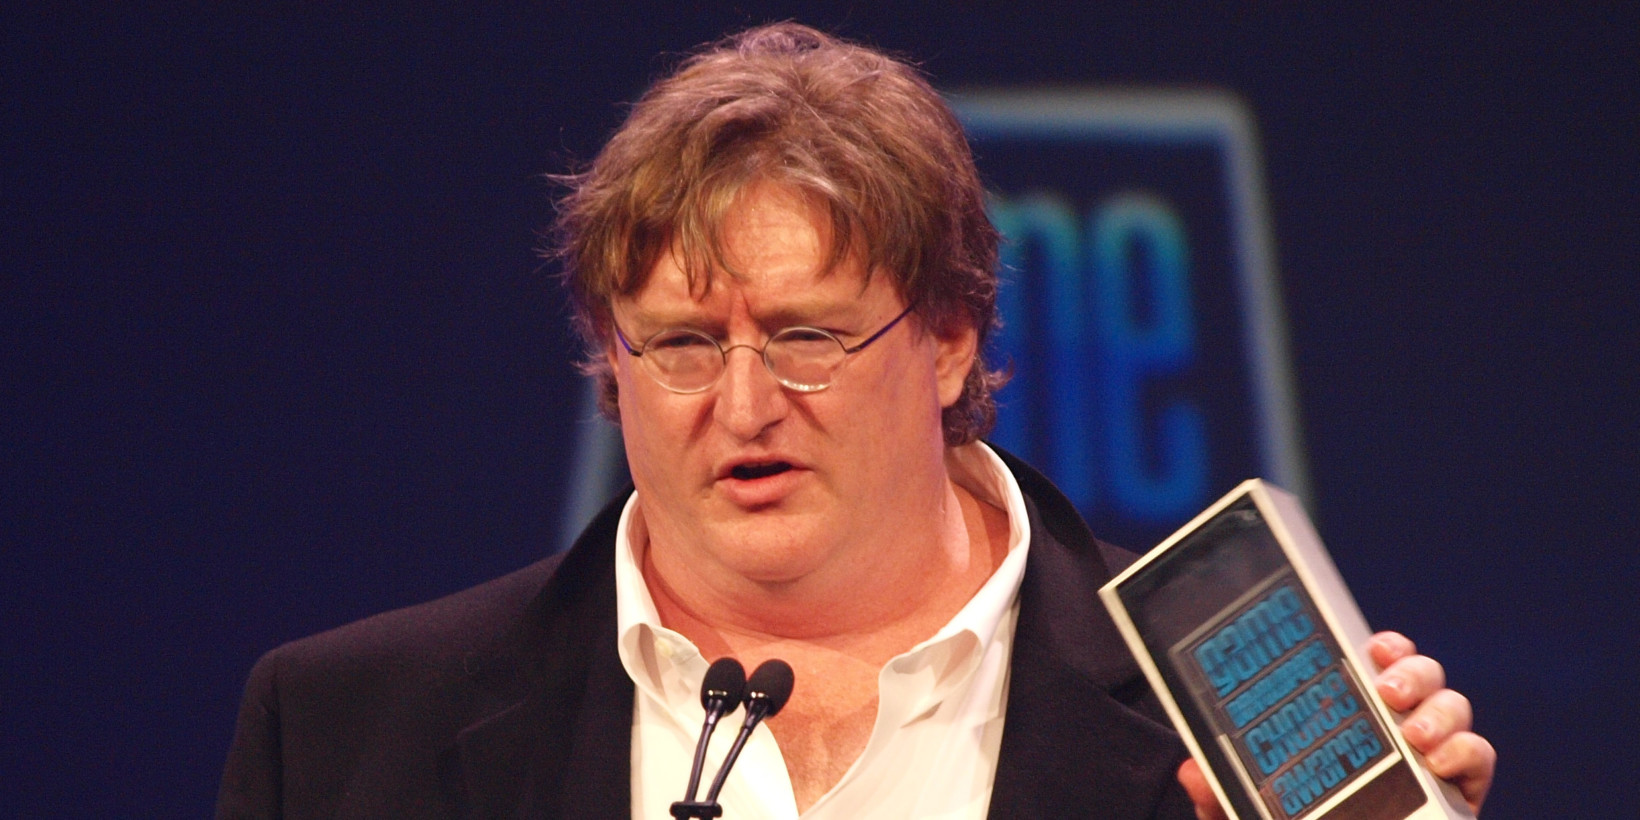 Gabe Newell Teases Unannounced Games and Left 4 Dead in AMA